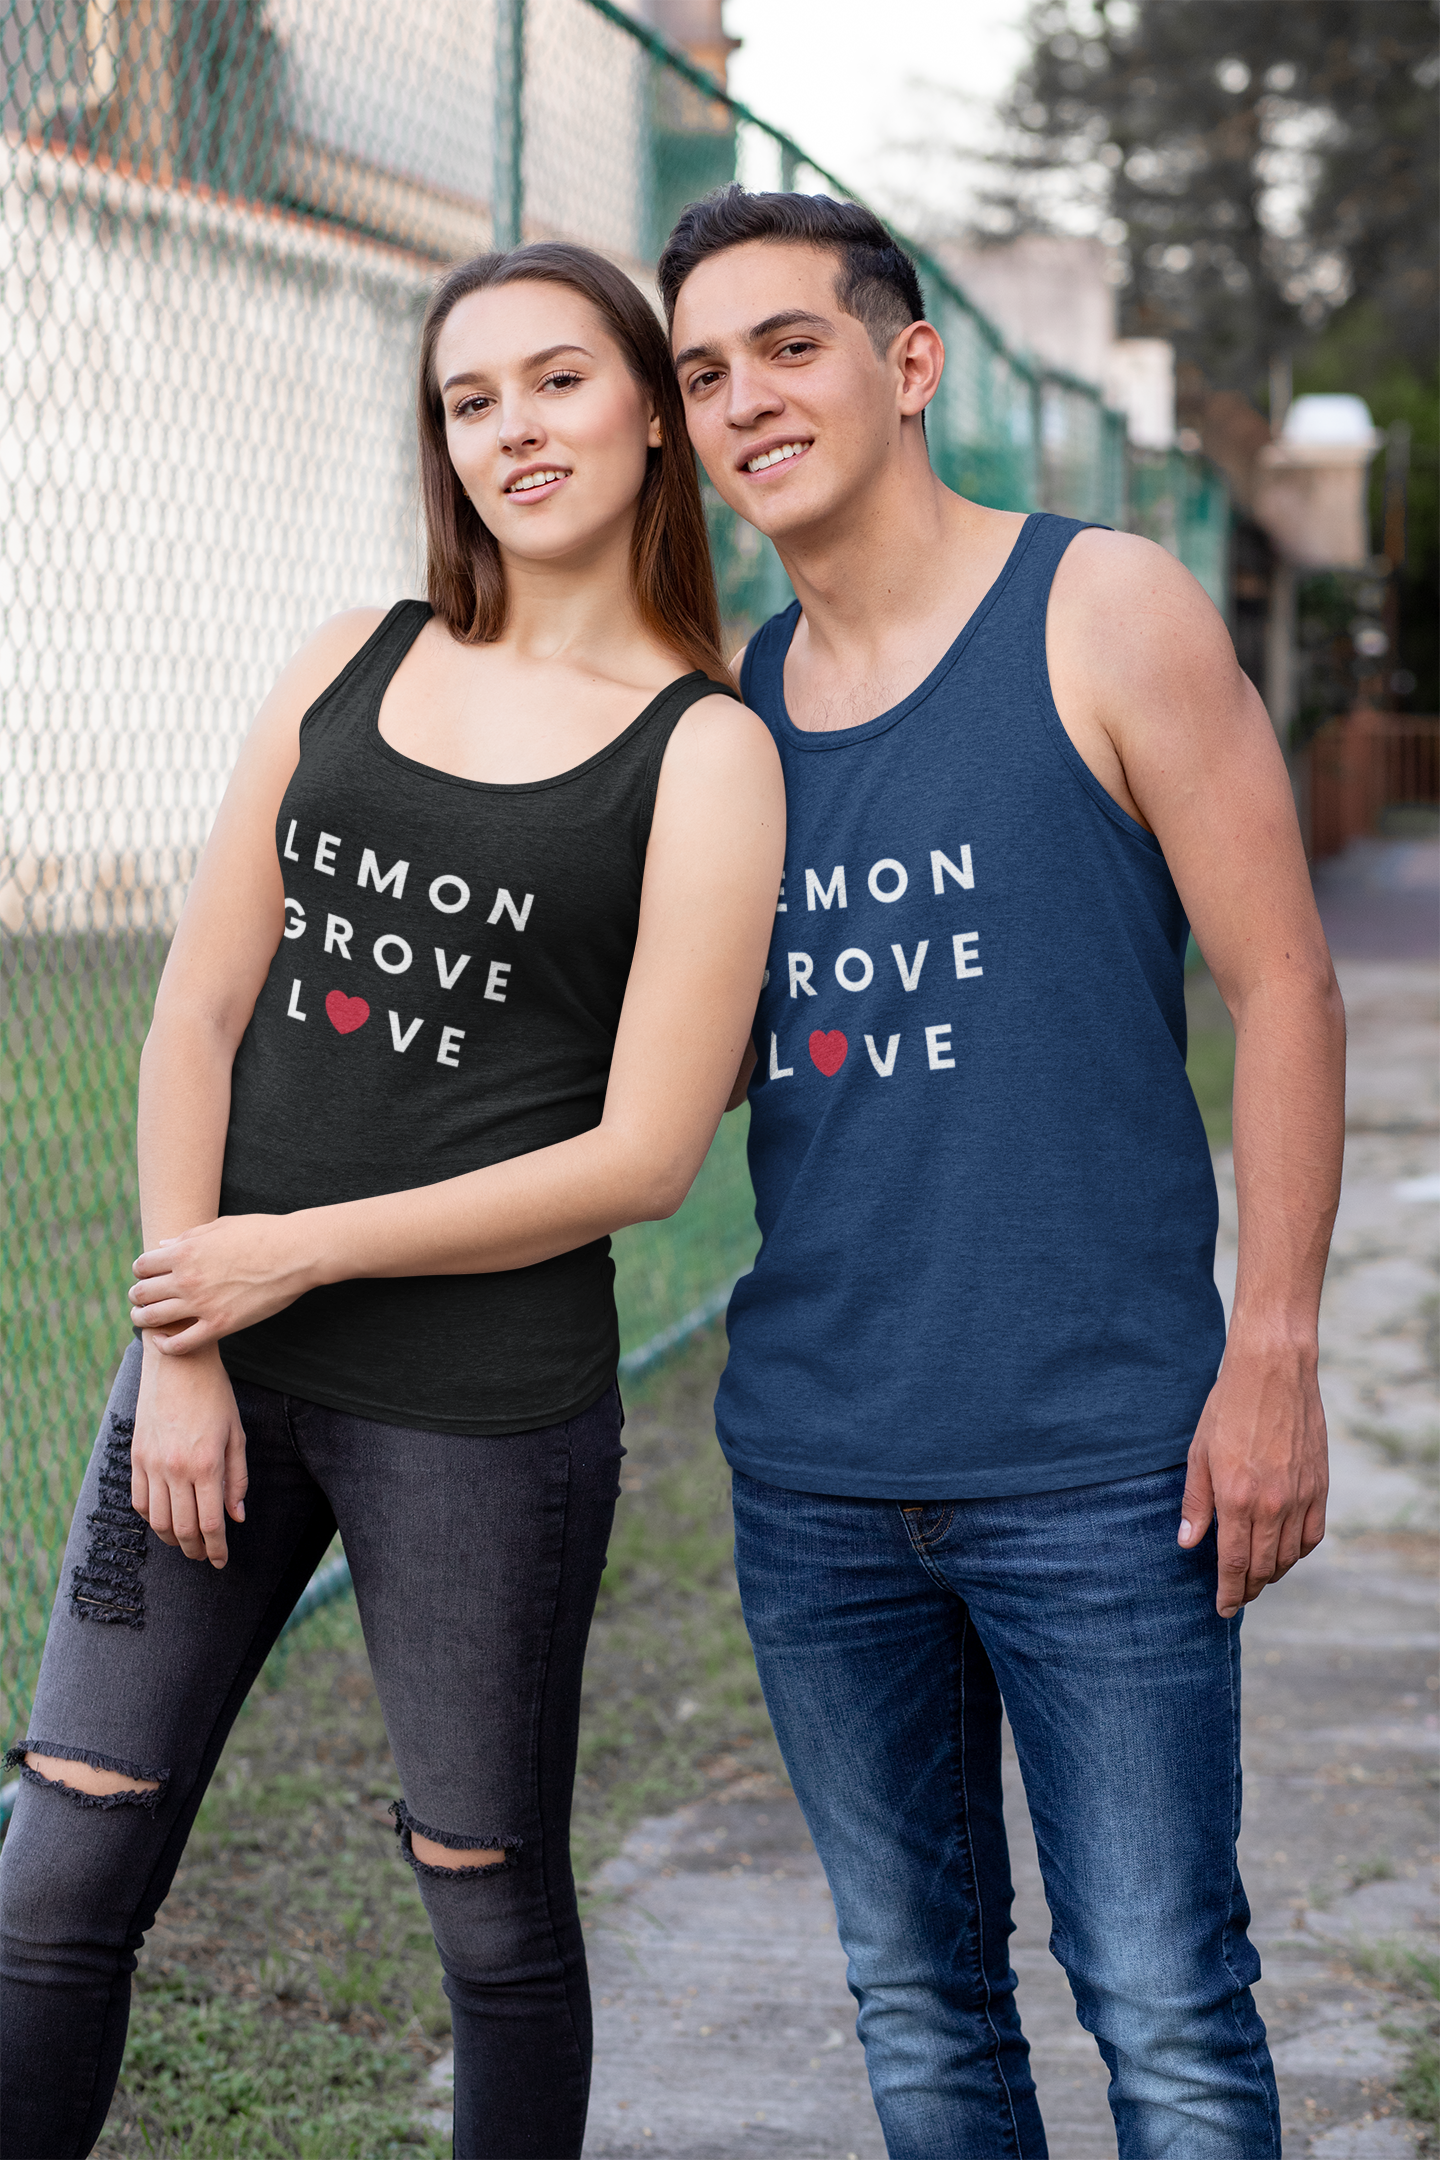 Couple standing outside a park wearing matching Lemon Grove tank-tops.